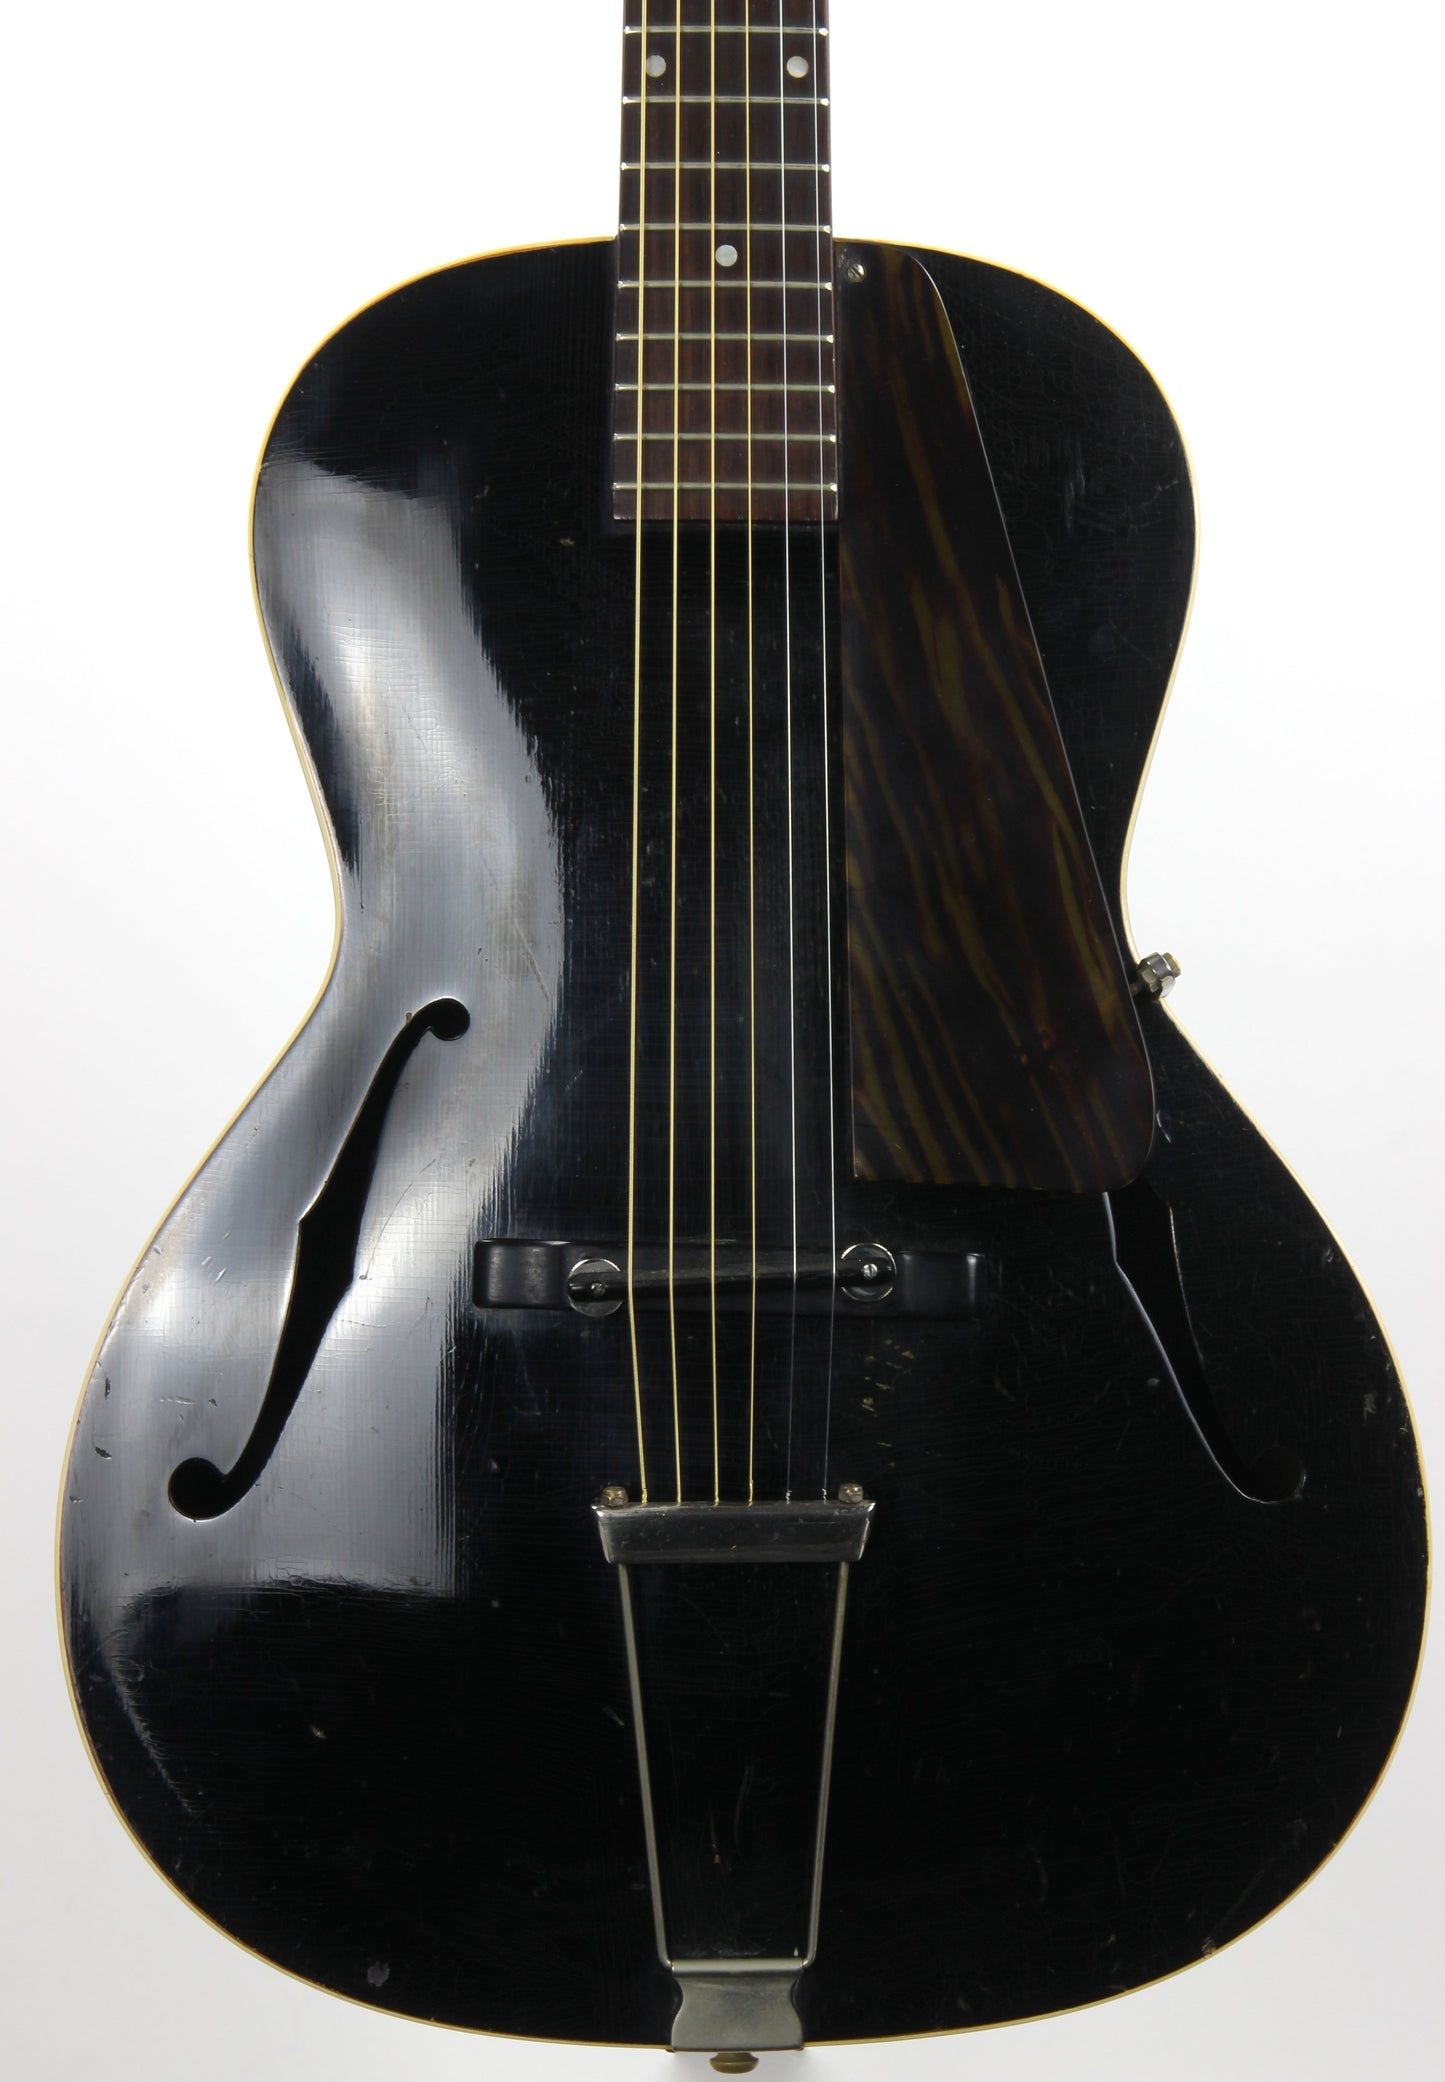 1935 Gibson L-30 Ebony Black Archtop Acoustic Guitar - The Original BB King LUCILLE!